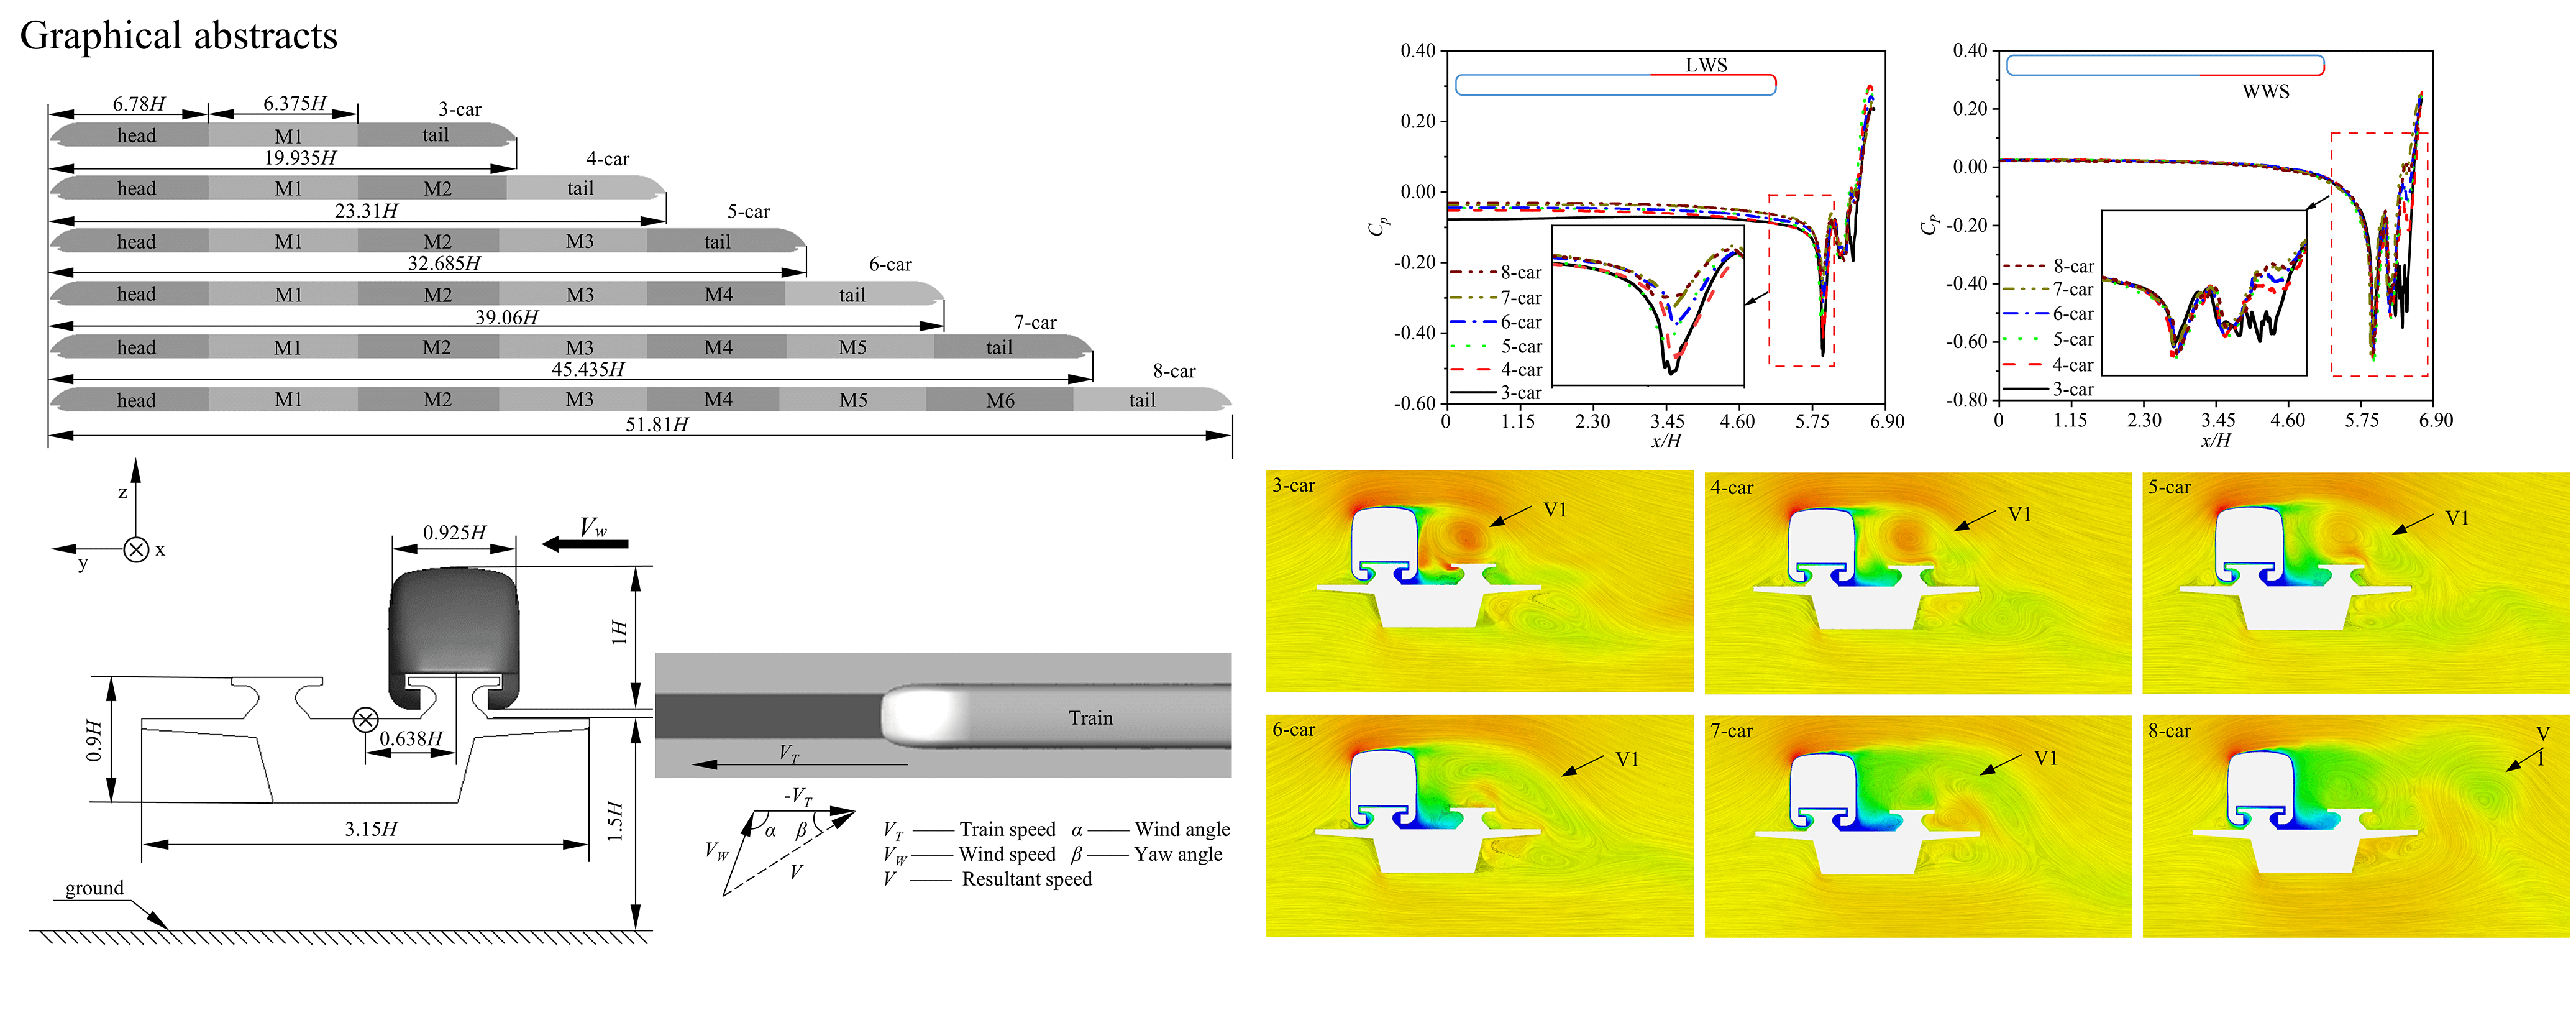 Aerodynamic Features of High-Speed Maglev Trains with Different Marshaling Lengths Running on a Viaduct under Crosswinds